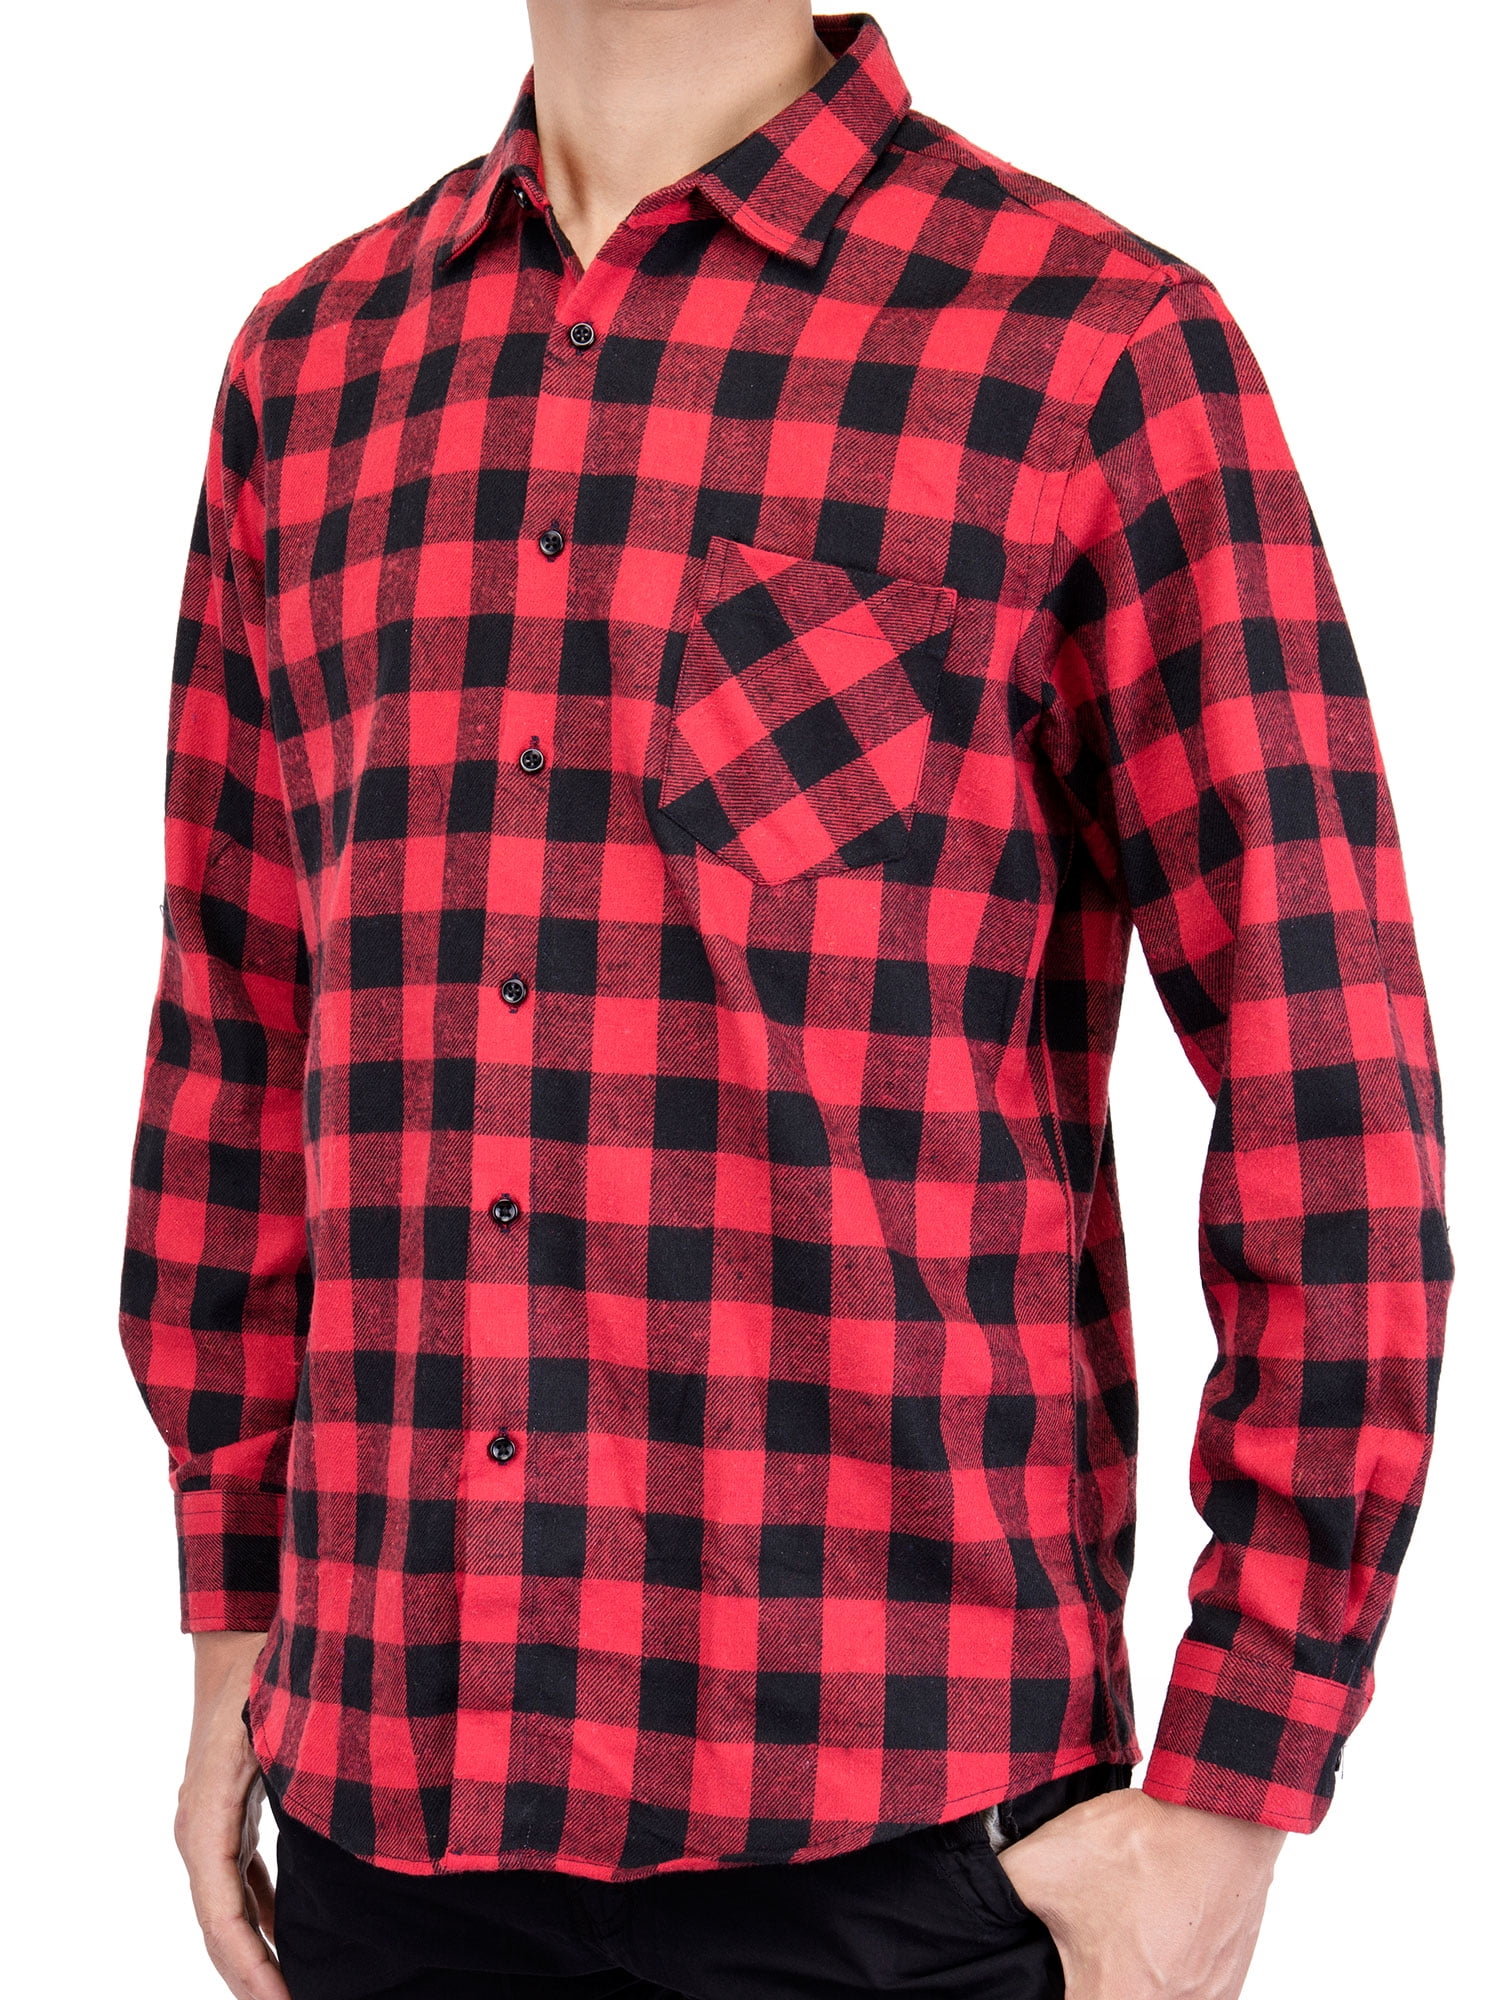 Fieer Mens Bussiness Long-Sleeve Buttoned Spring/Autumn Plaid Shirts